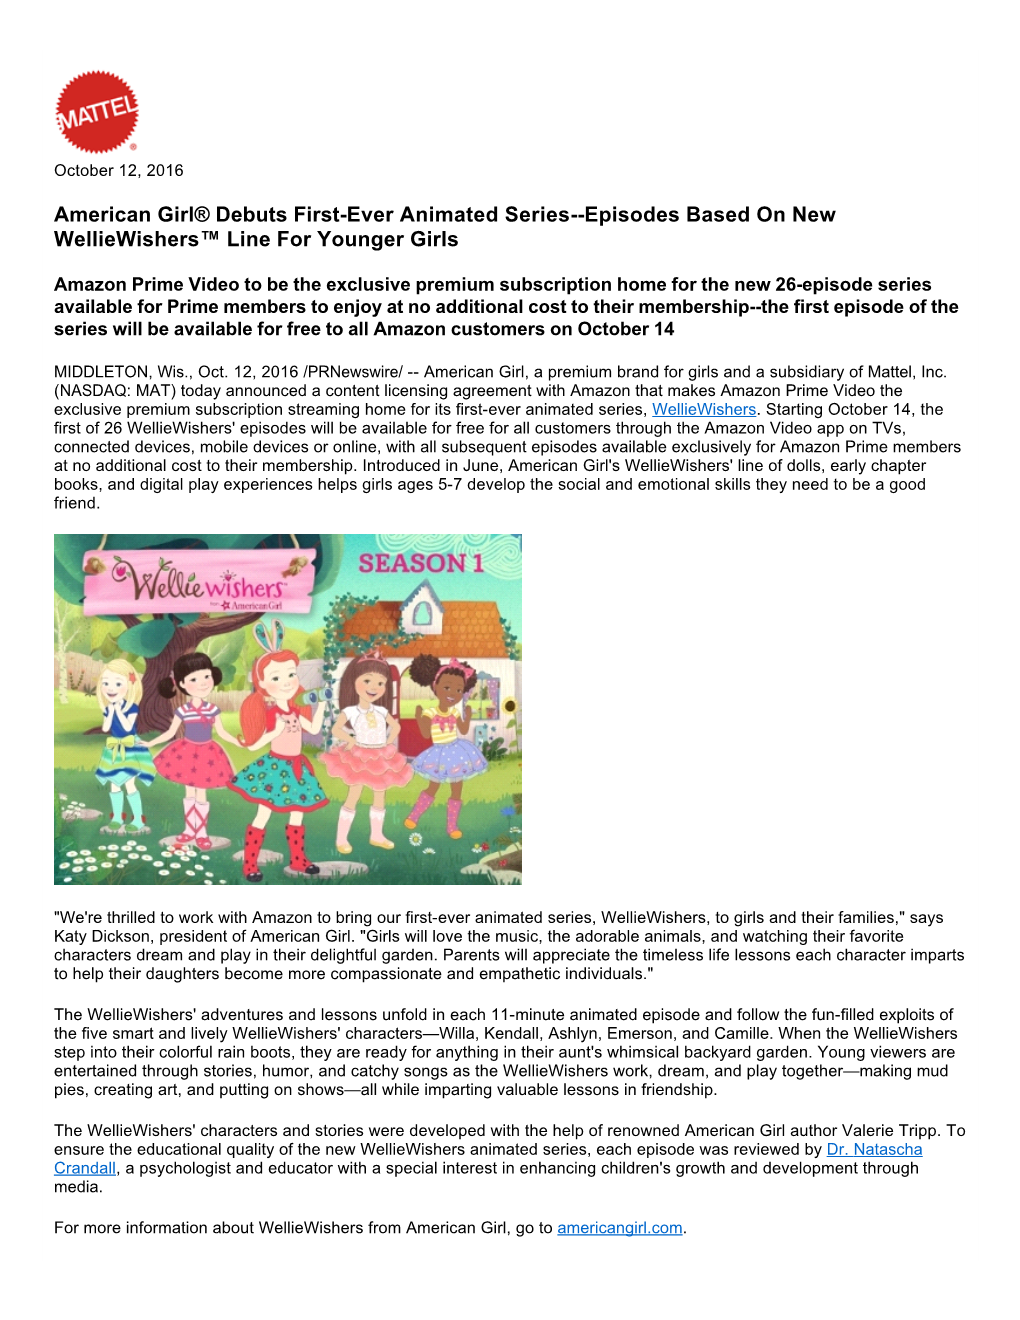 American Girl® Debuts First-Ever Animated Series--Episodes Based on New Welliewishers™ Line for Younger Girls